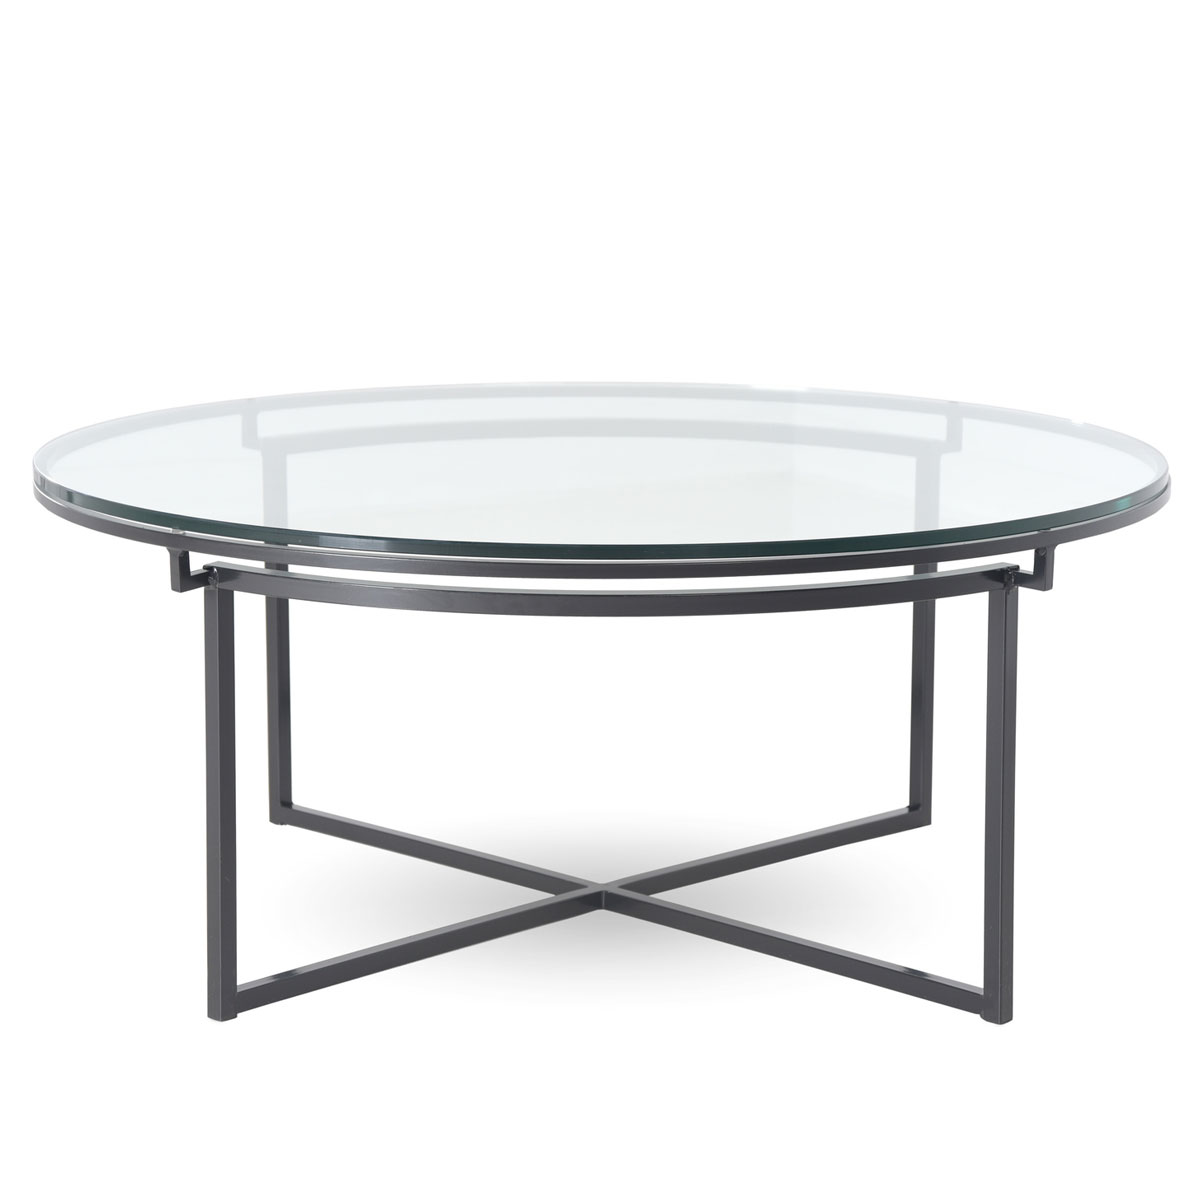 Charleston Forge Fillmore 36 inch Round Cocktail Table